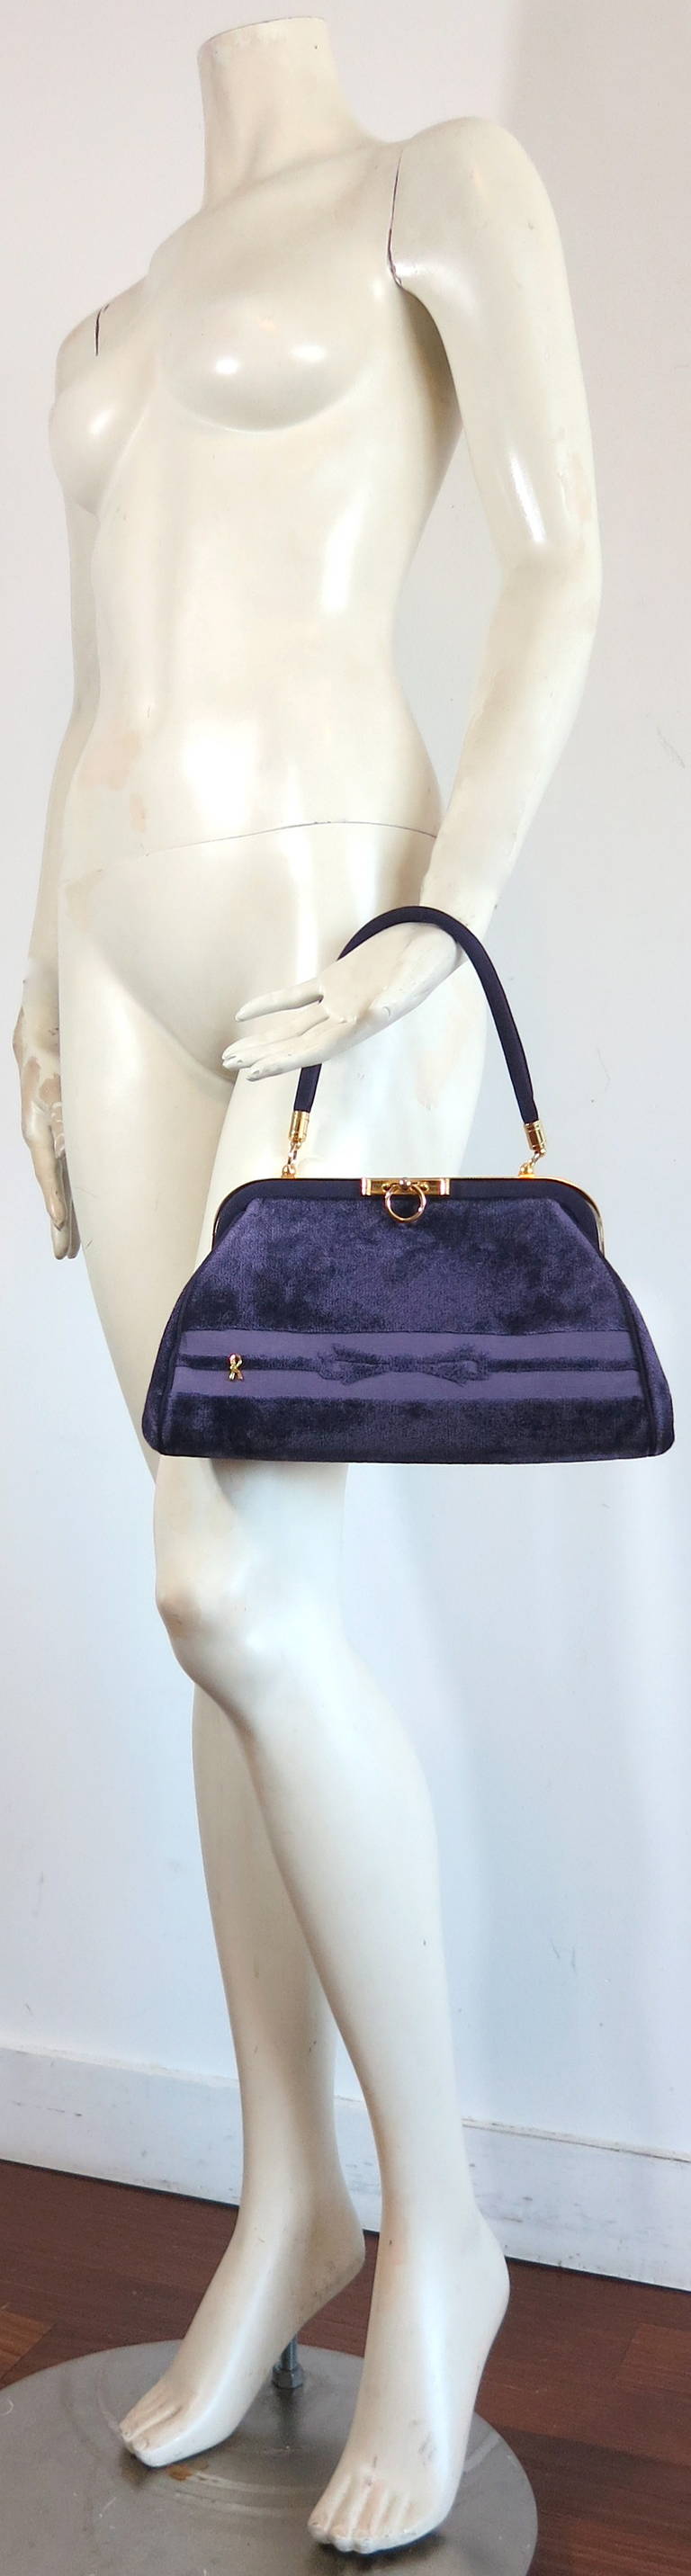 Excellent condition, vintage ROBERTA DI CAMERINO purple velvet purse.

Signature, cut velvet, bow front artwork with metal 'R' monogram logo front.

Polished gold finish metal hardwares with ring front opening at the top.  

The bag is opened